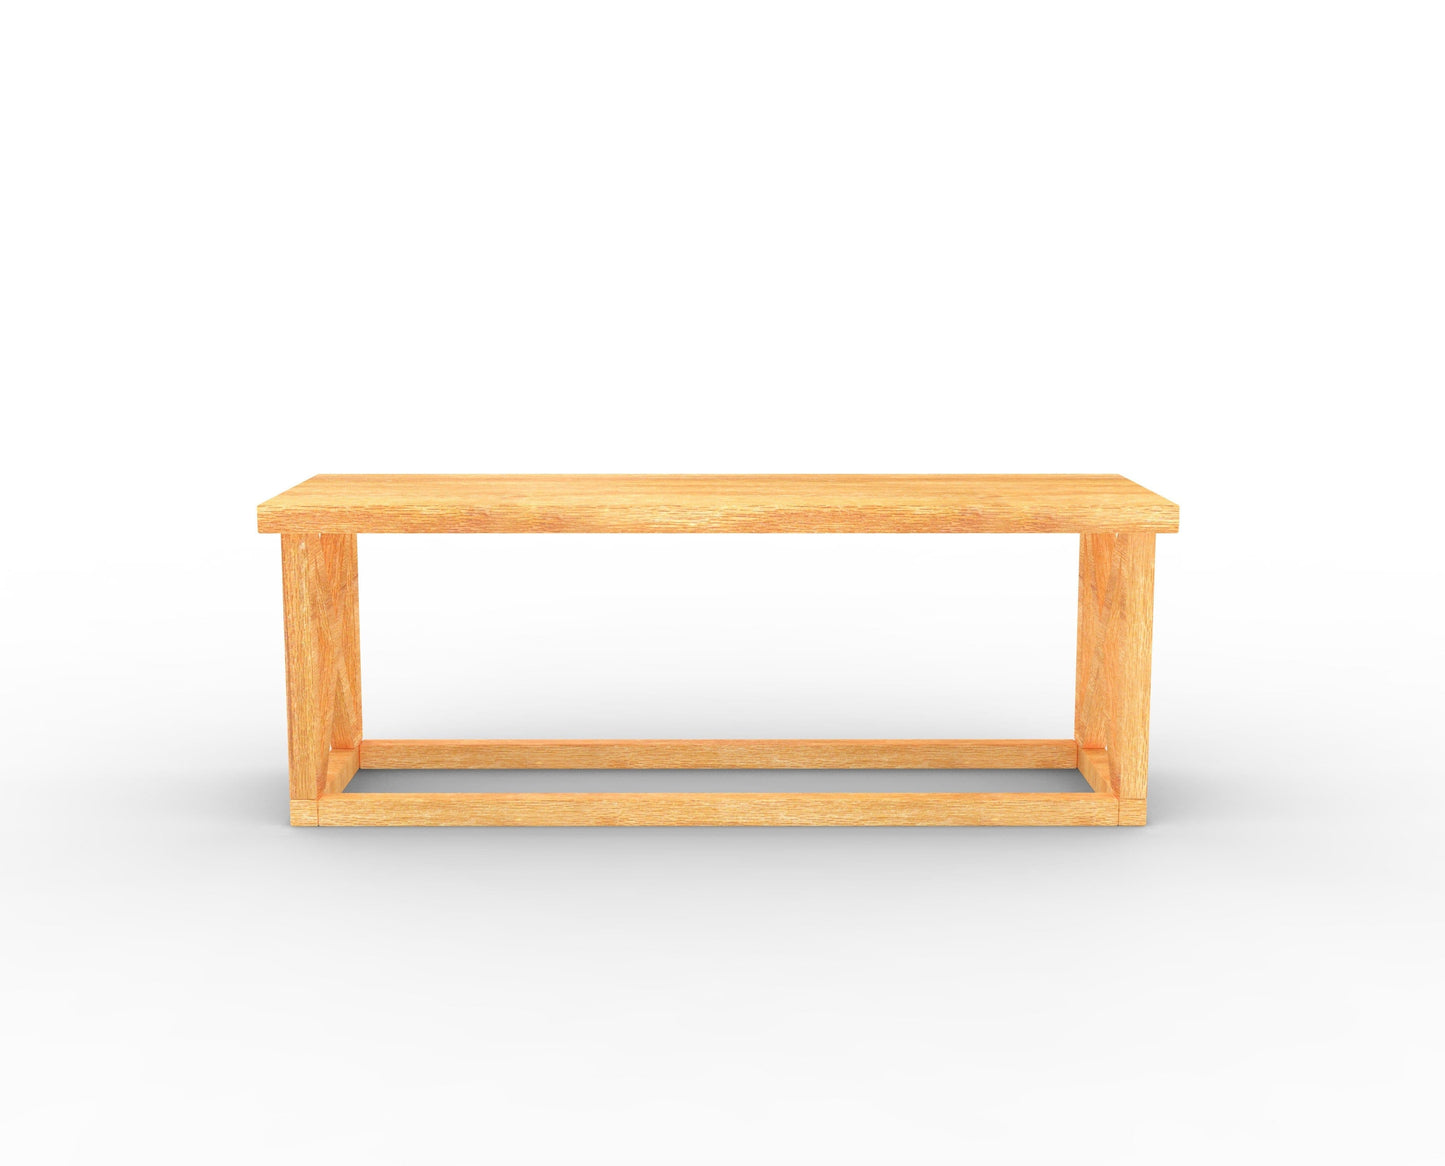 The Carpentry Shop Co. Build Your Own Bench